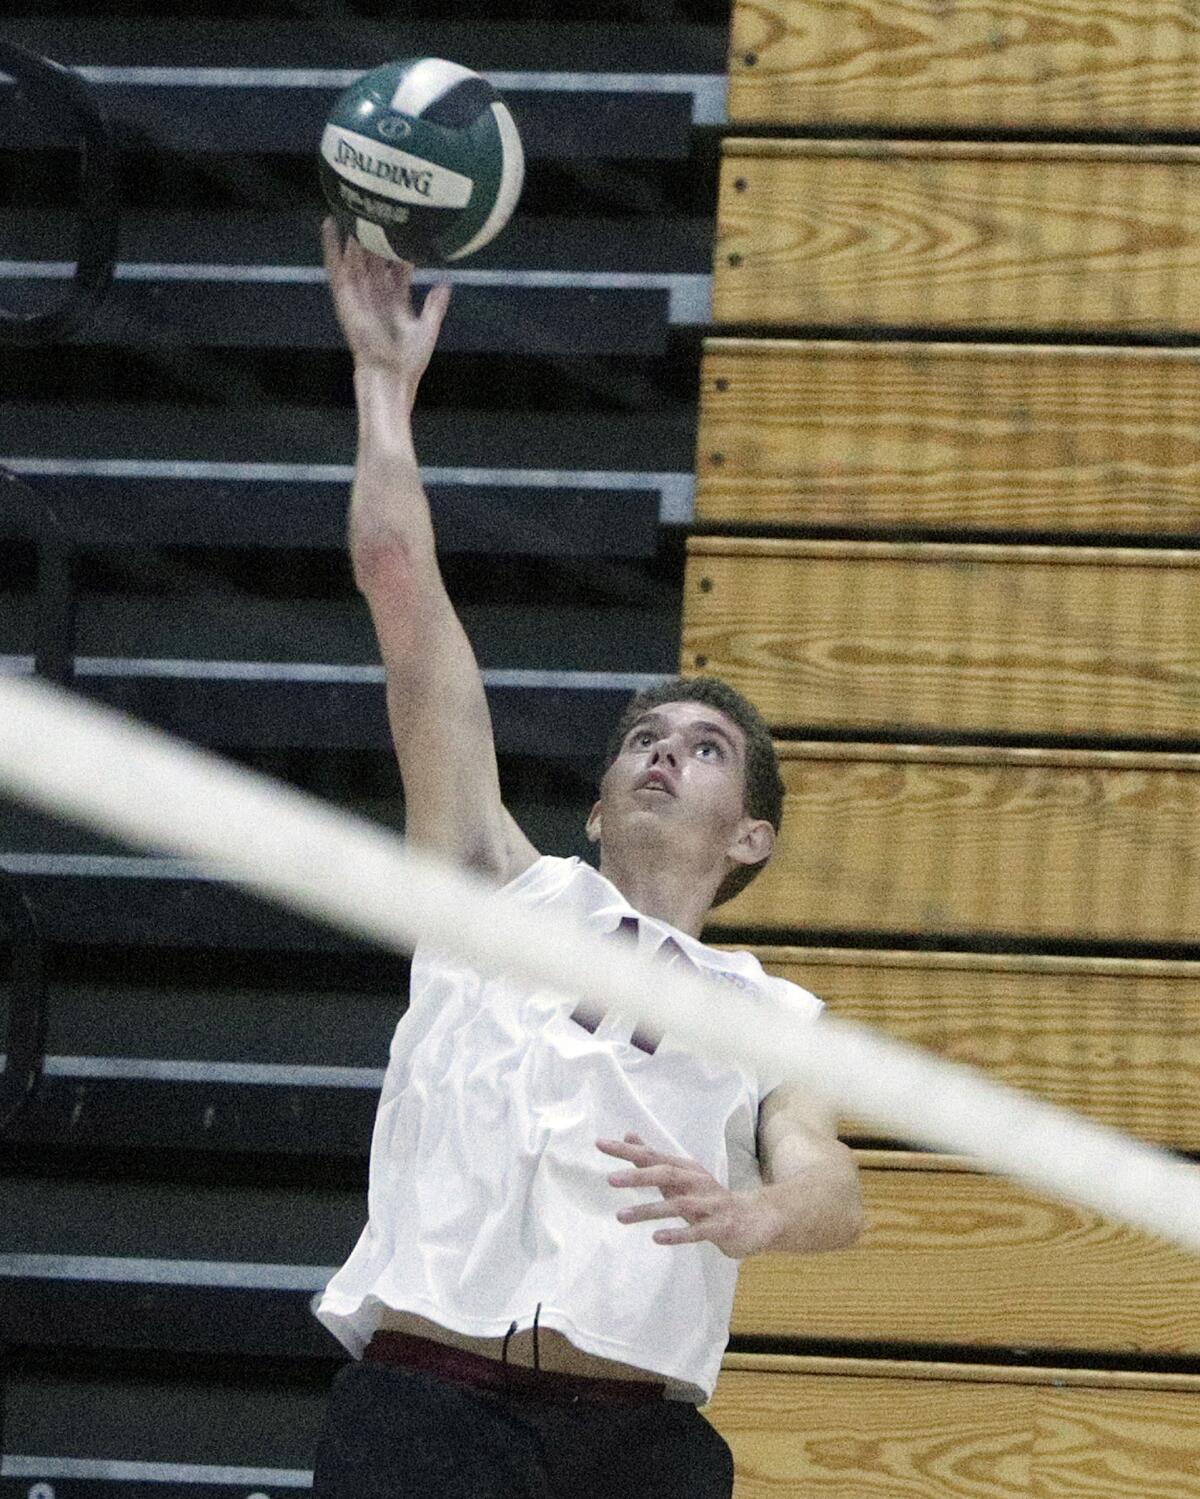 Laguna Beach's Andrew Reavis records a kill against Edison in a pool-play match of the Orange County Championships on Friday.